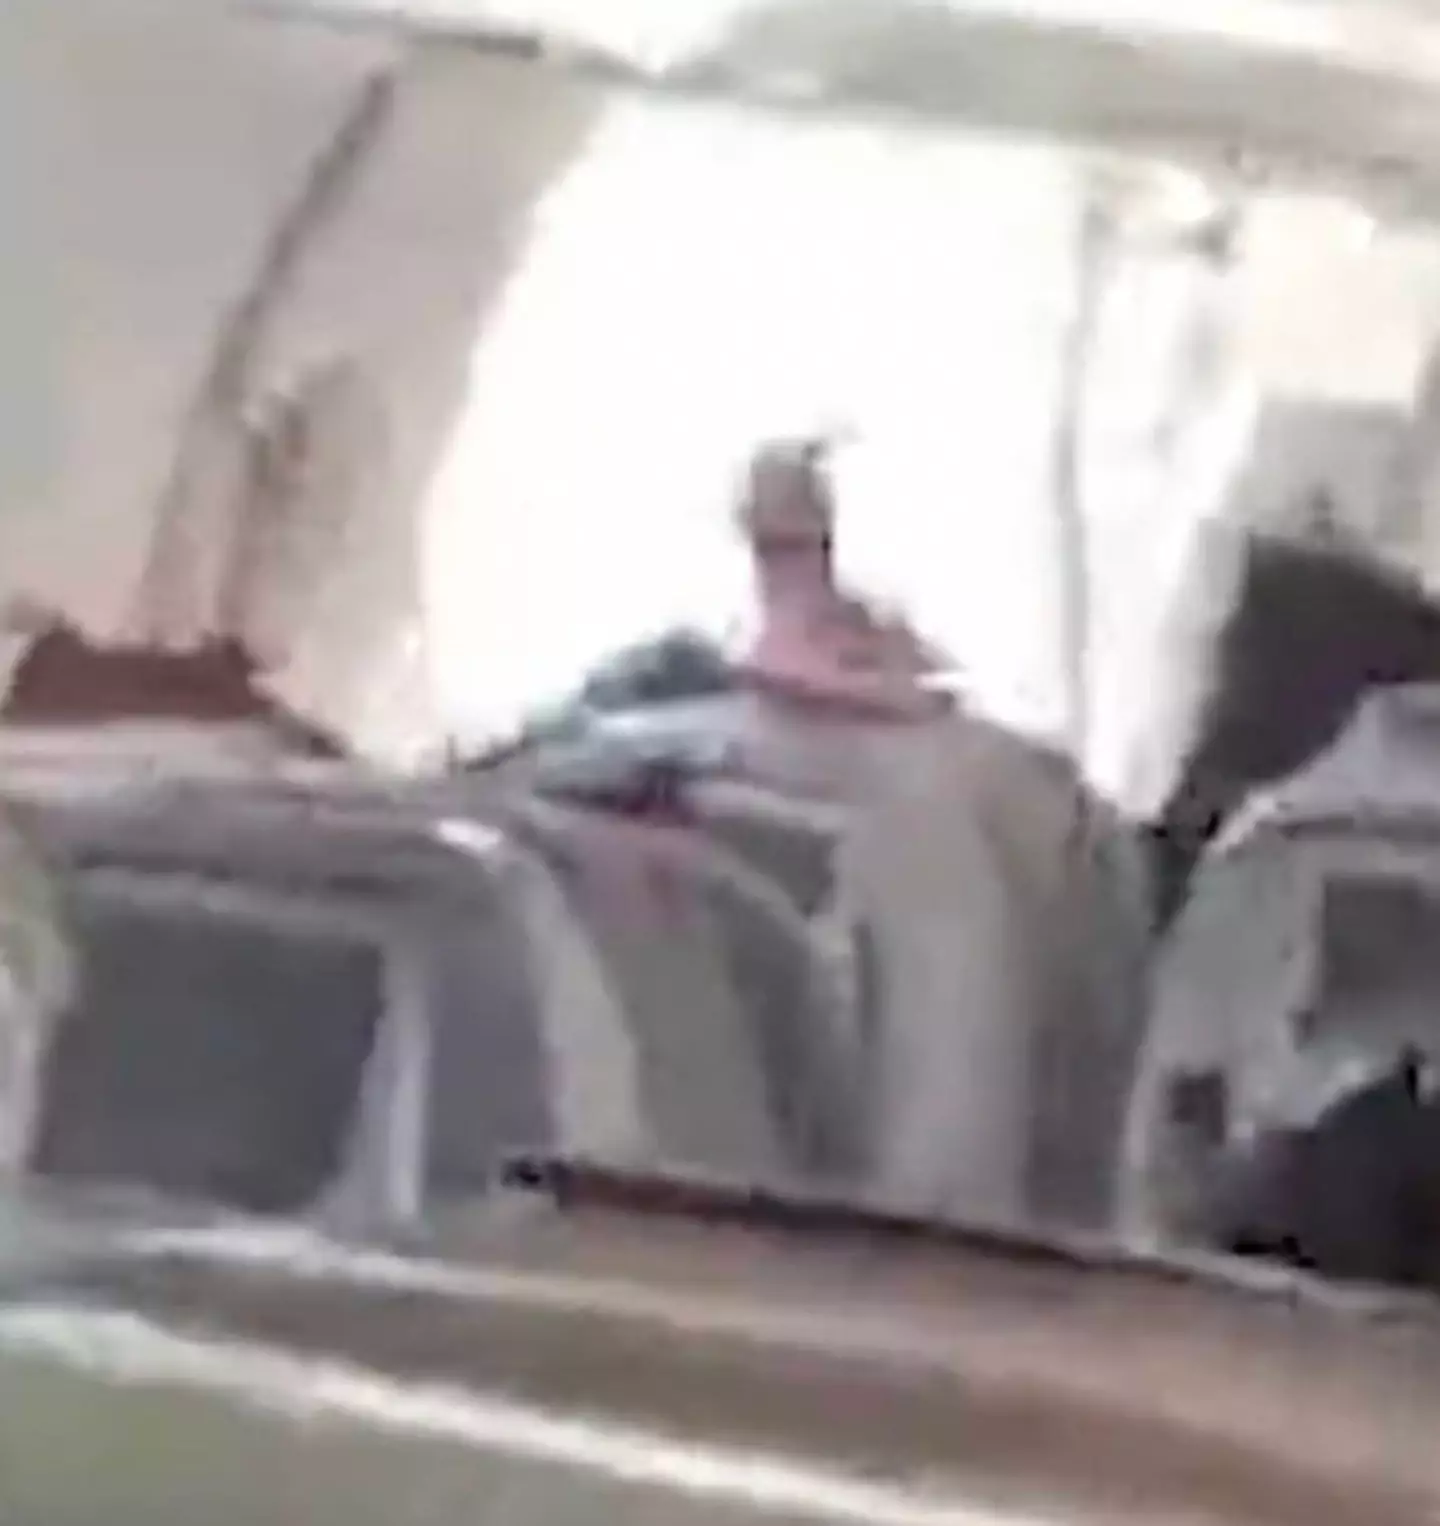 Video footage shows wing tearing through the cabin.